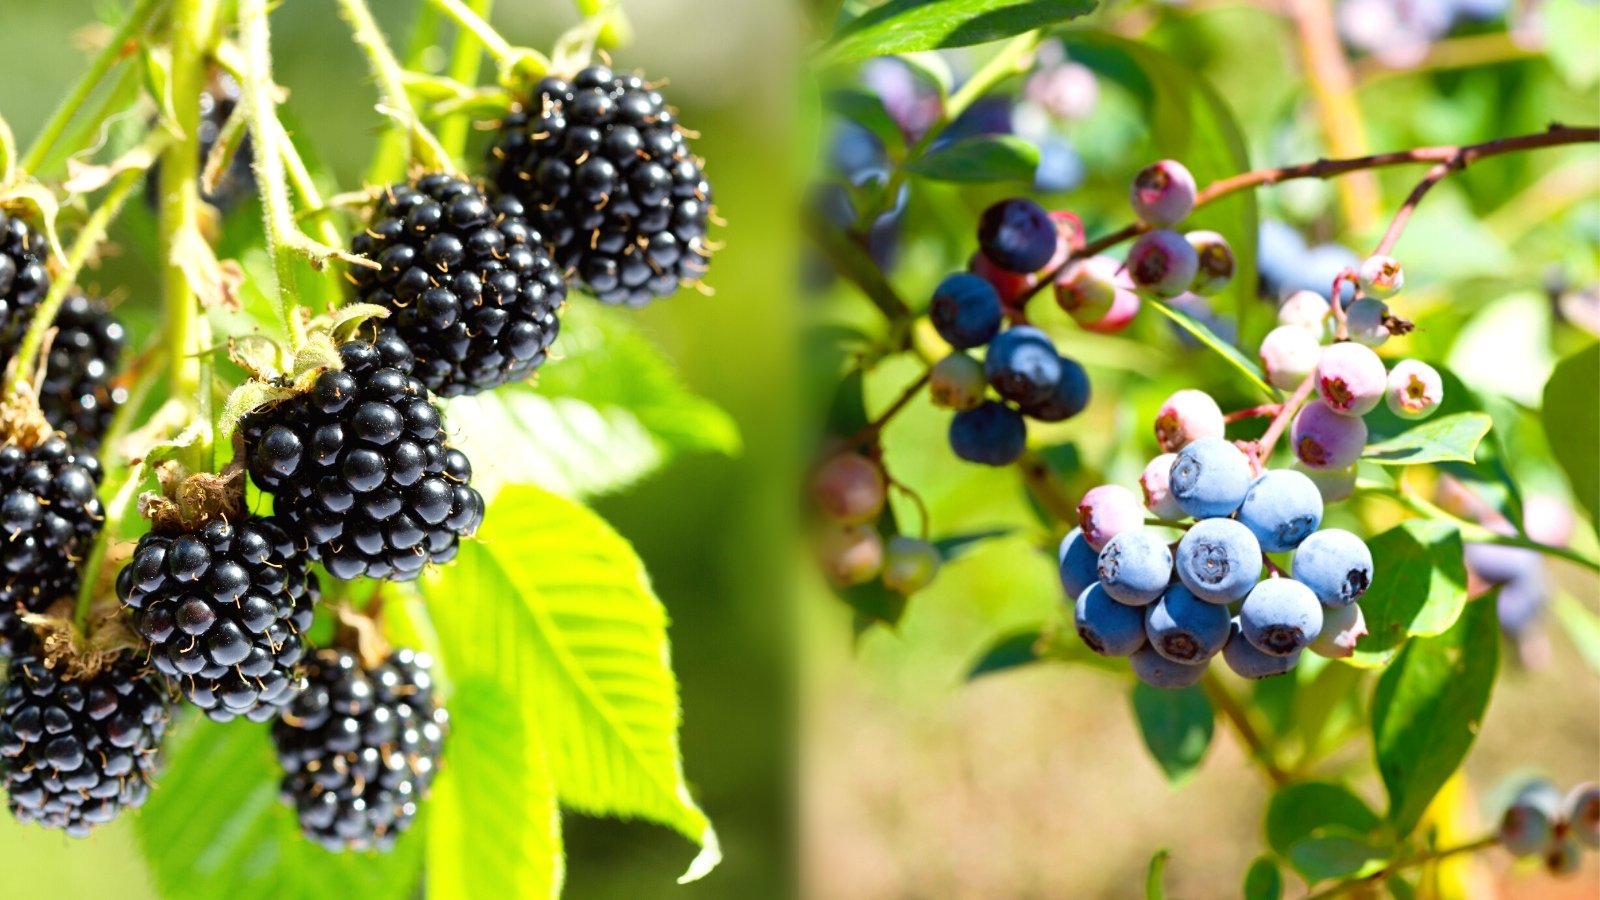 Can You Plant Blueberries With Blackberries?